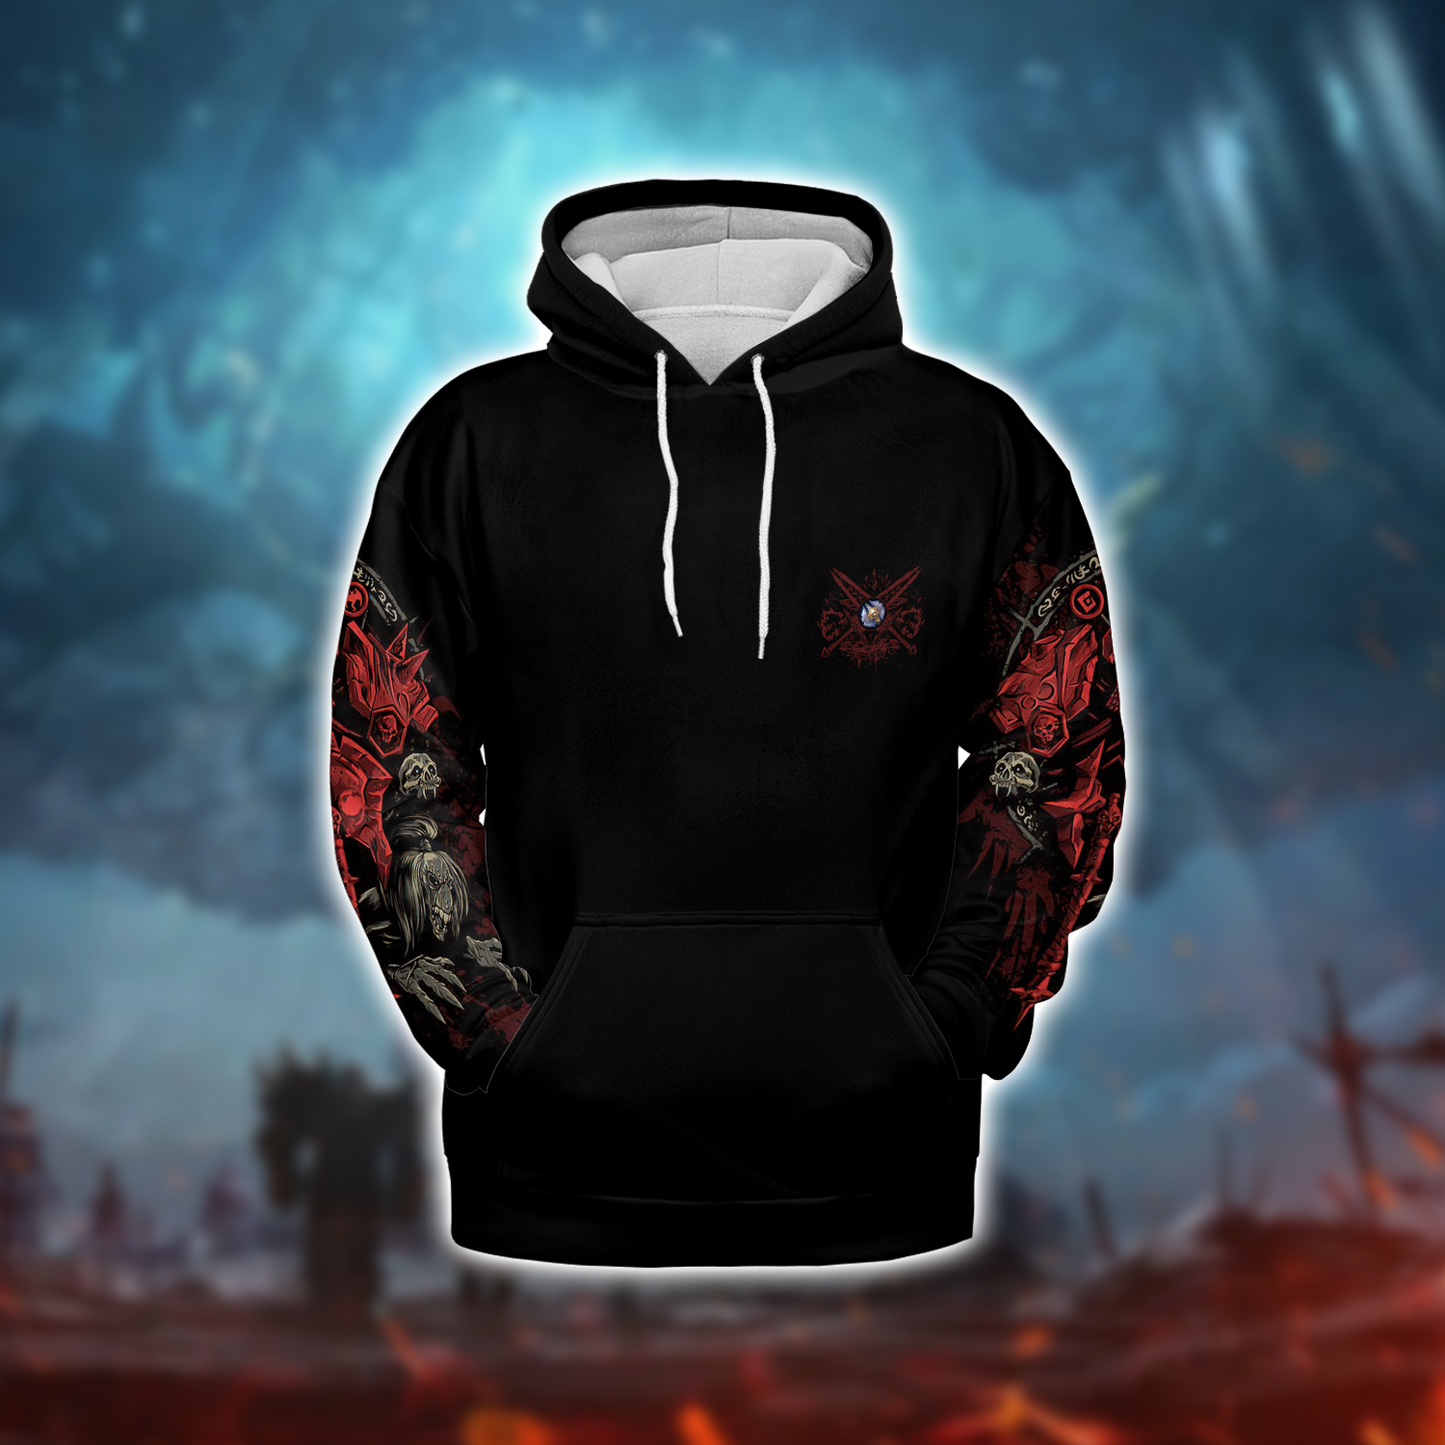 Blood Death Knight WoW Class Guide V1 AOP Hoodie